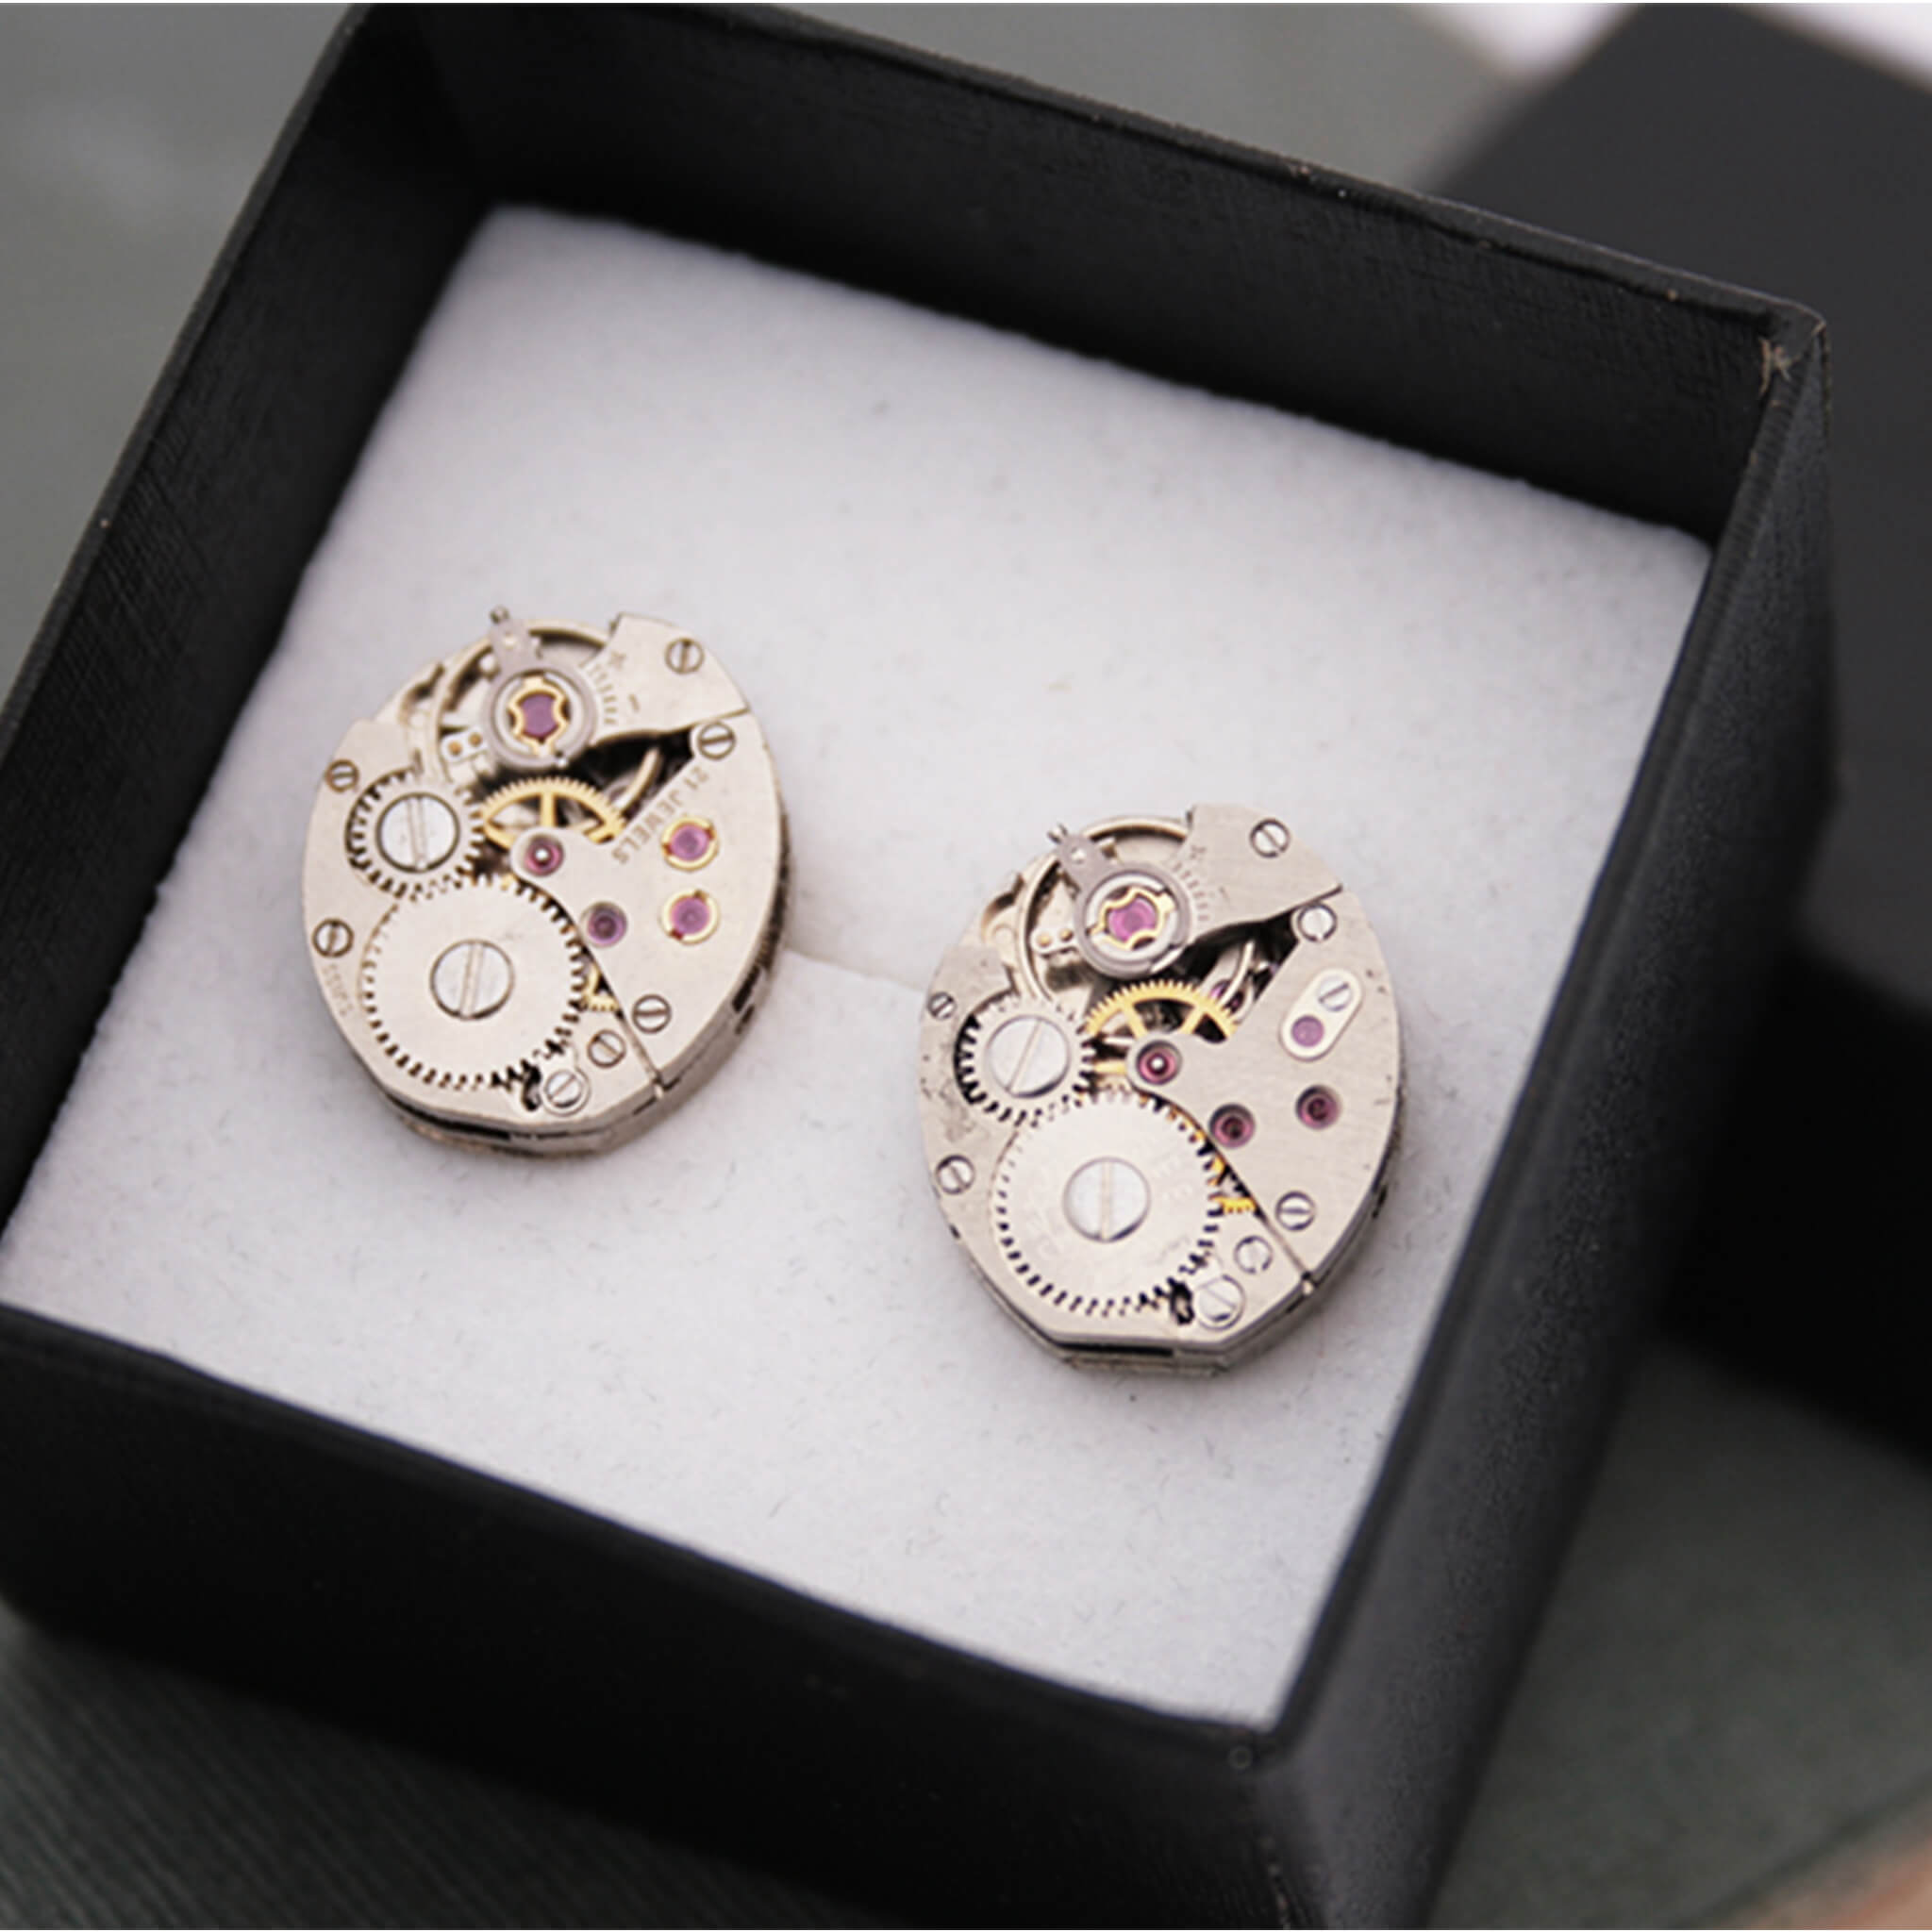 watch movements turned into stud earrings in a black presentation box